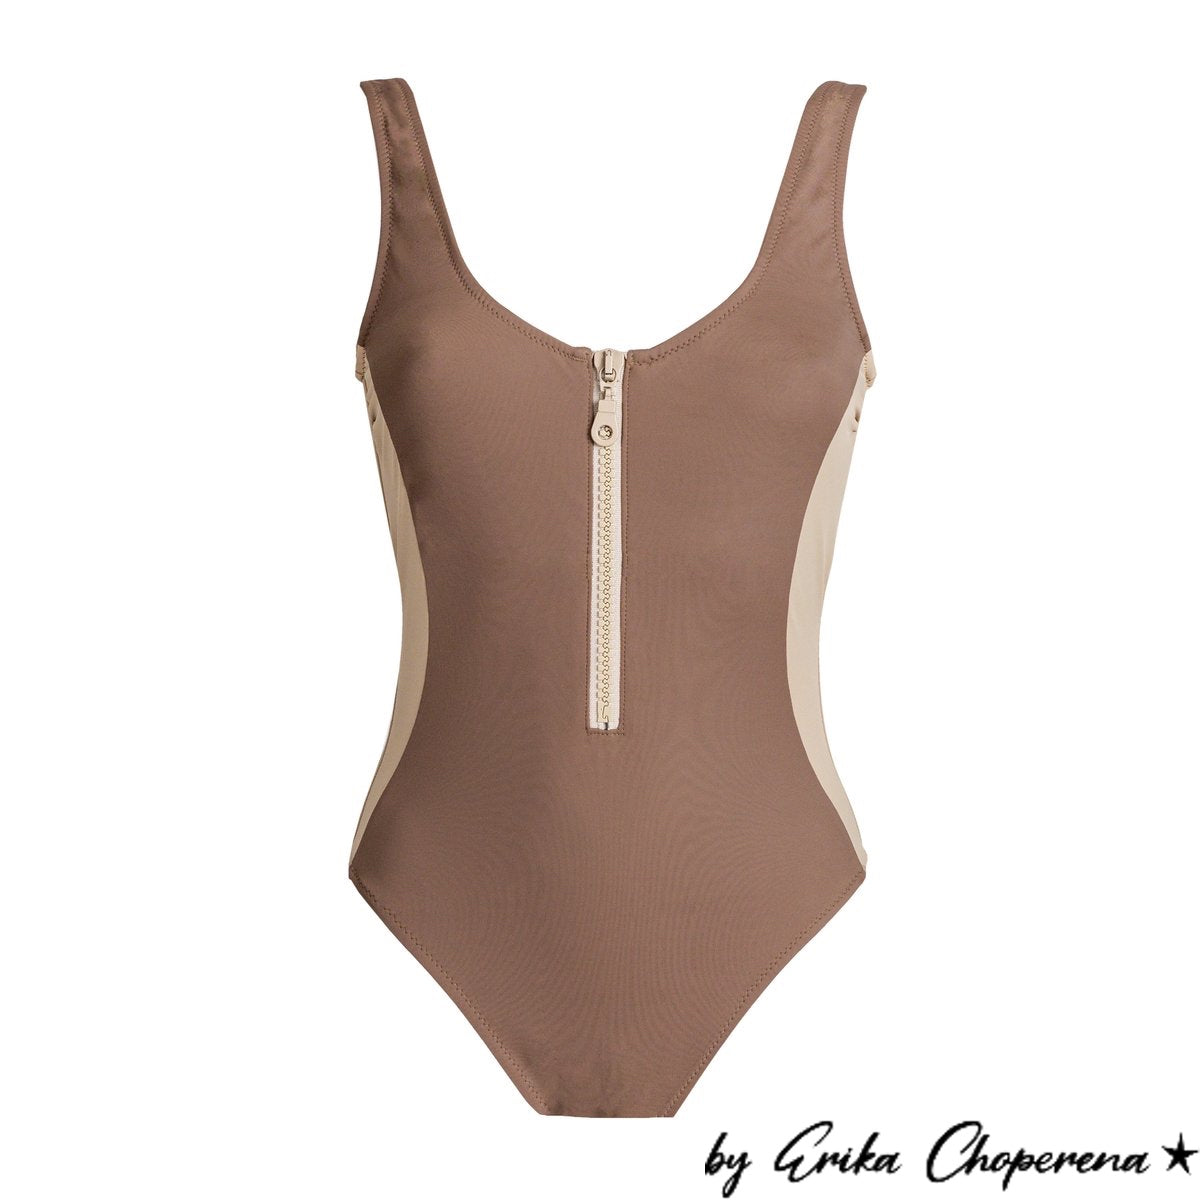 Designed by the famous celebrity Erika Choperena. Product description + Cheeky cut one piece swimsuit. Toasted beige colors. Adjustable beige zipper. Open back design with a stamped star. Bañador de chica. Bañador beige. Bañador con cremallera.